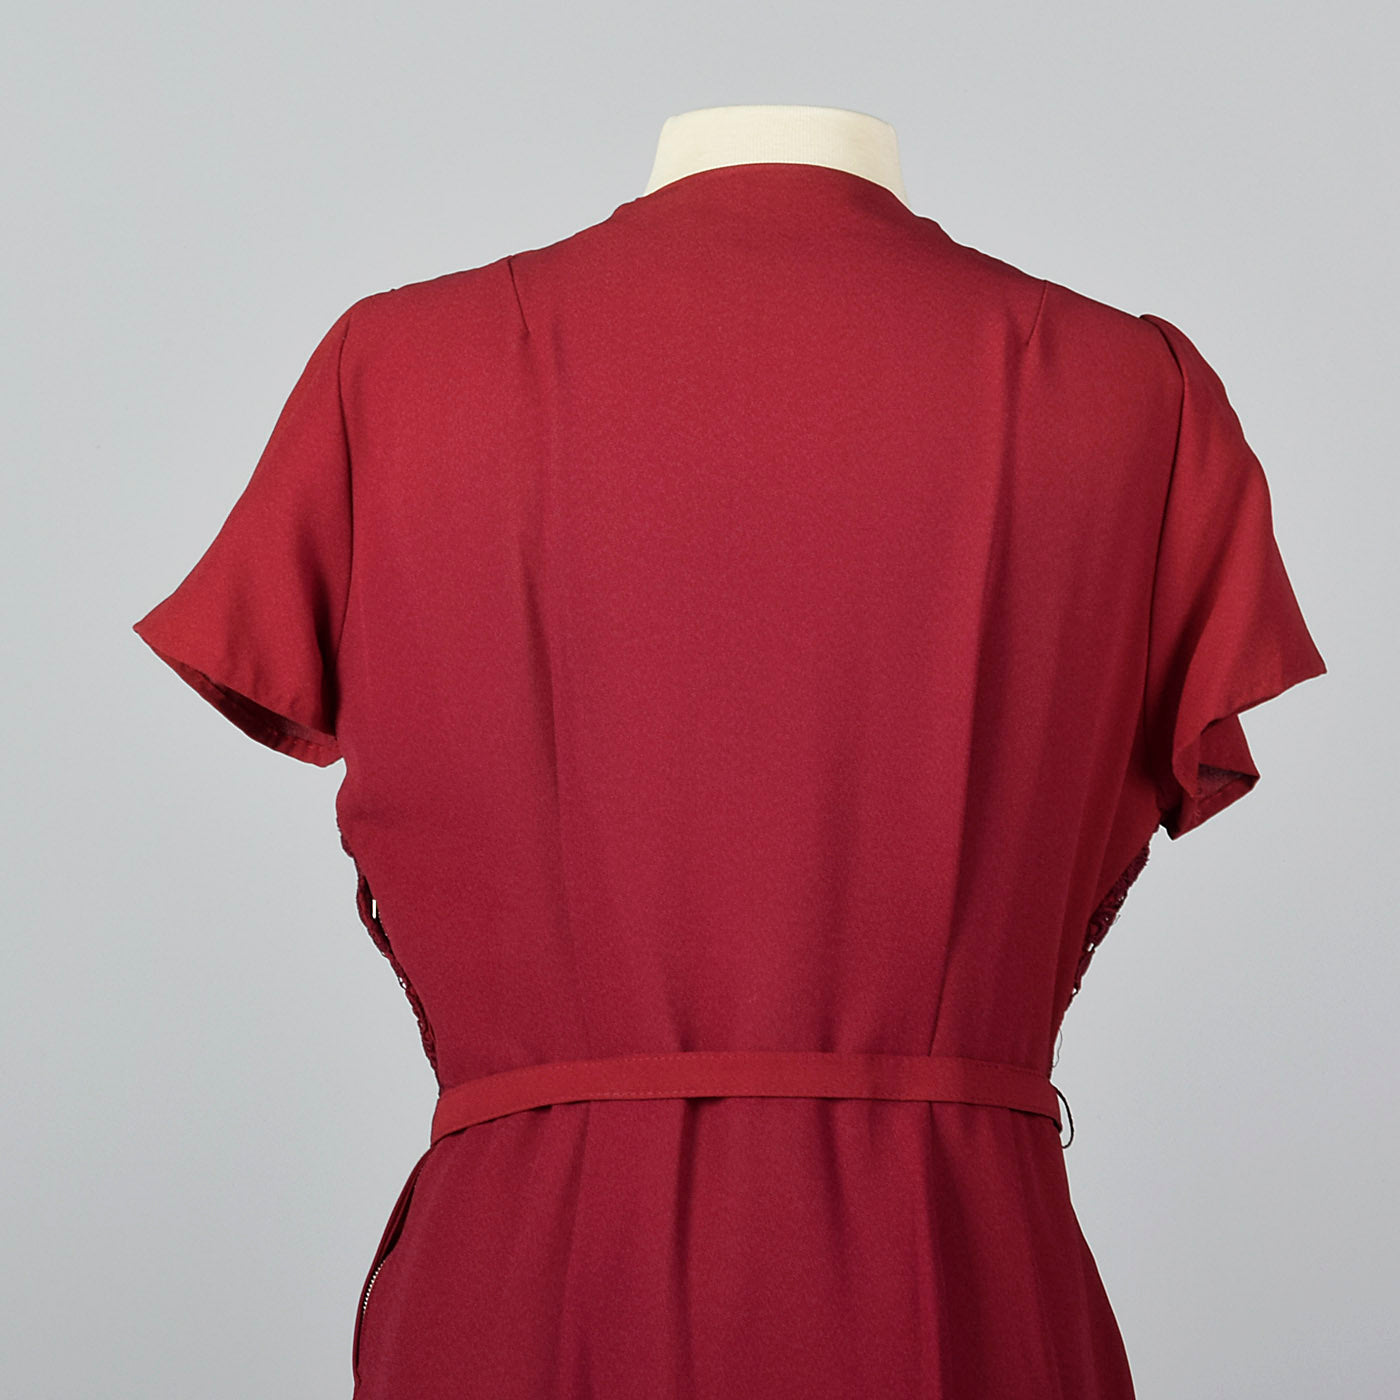 1950s Burgundy Dress with Lace Overlay